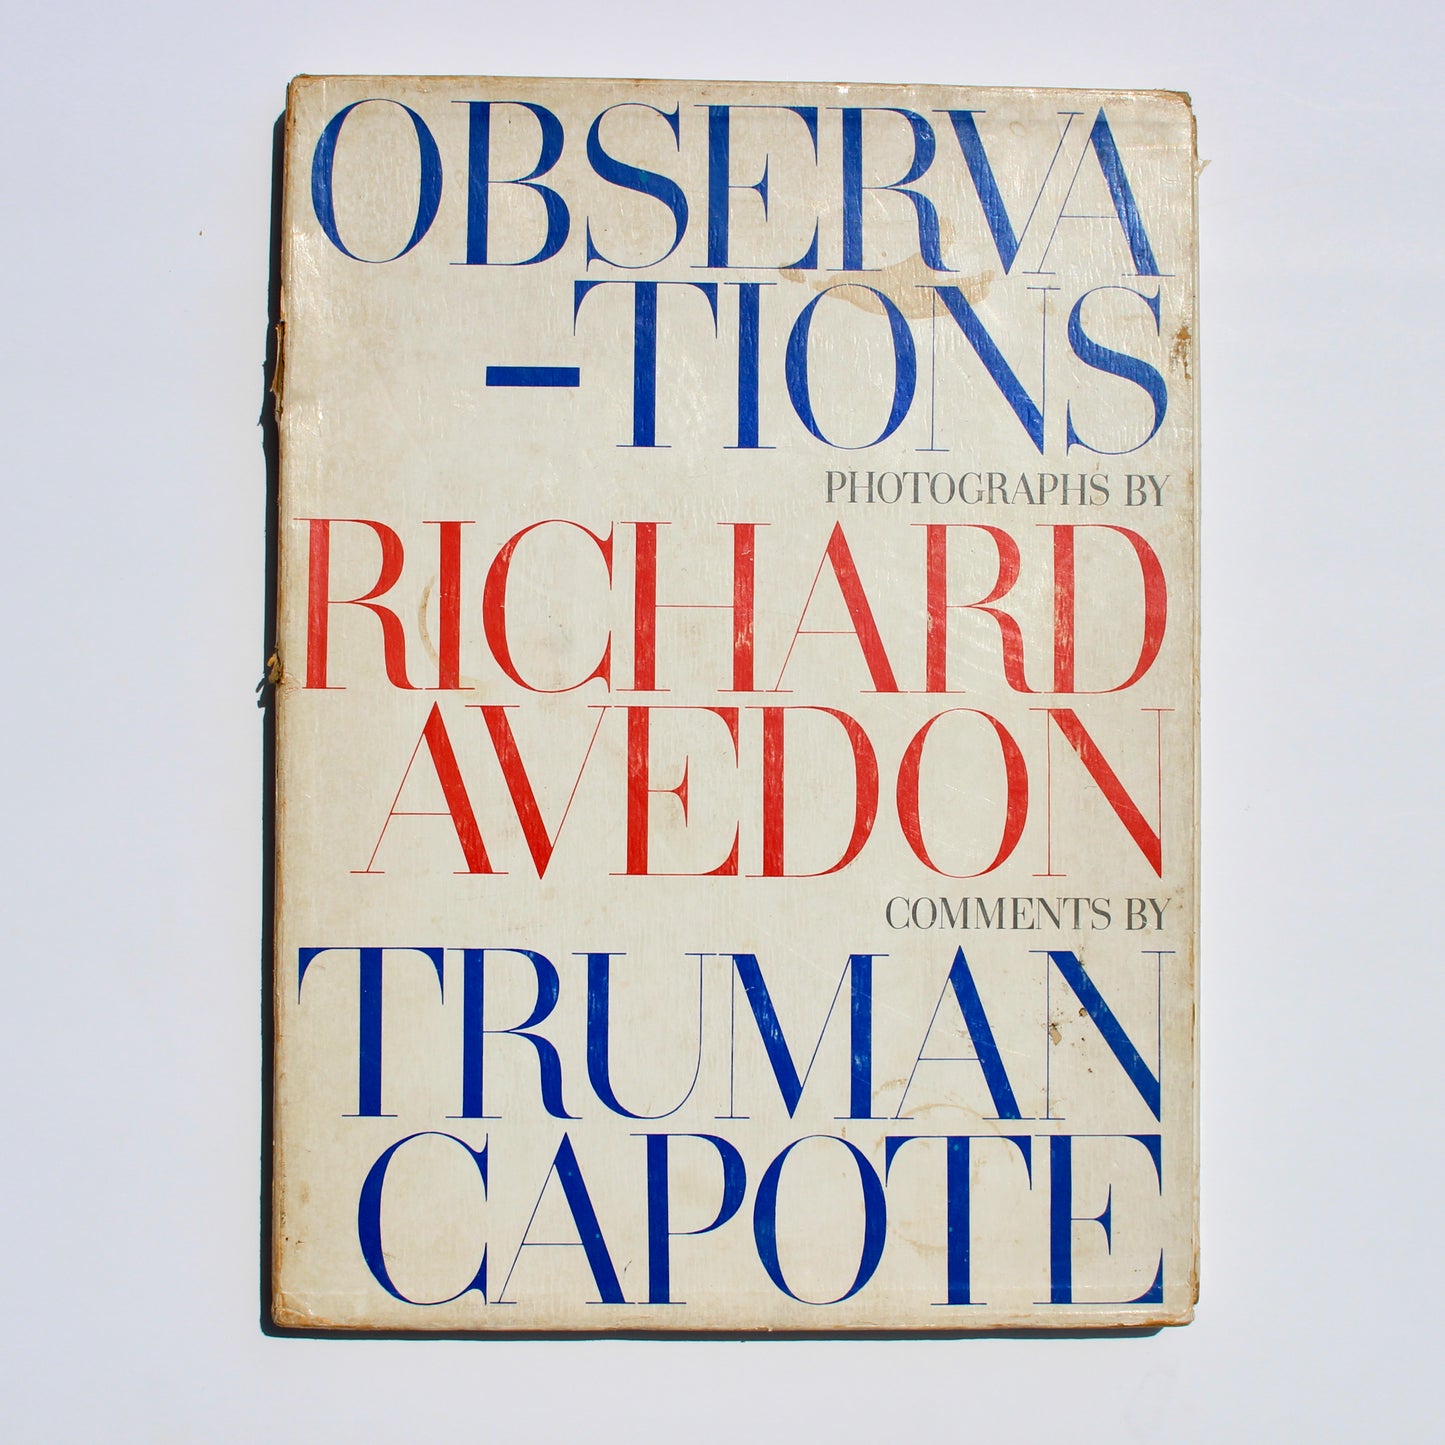 "Observations" by Richard Avedon + Truman Capote rare book